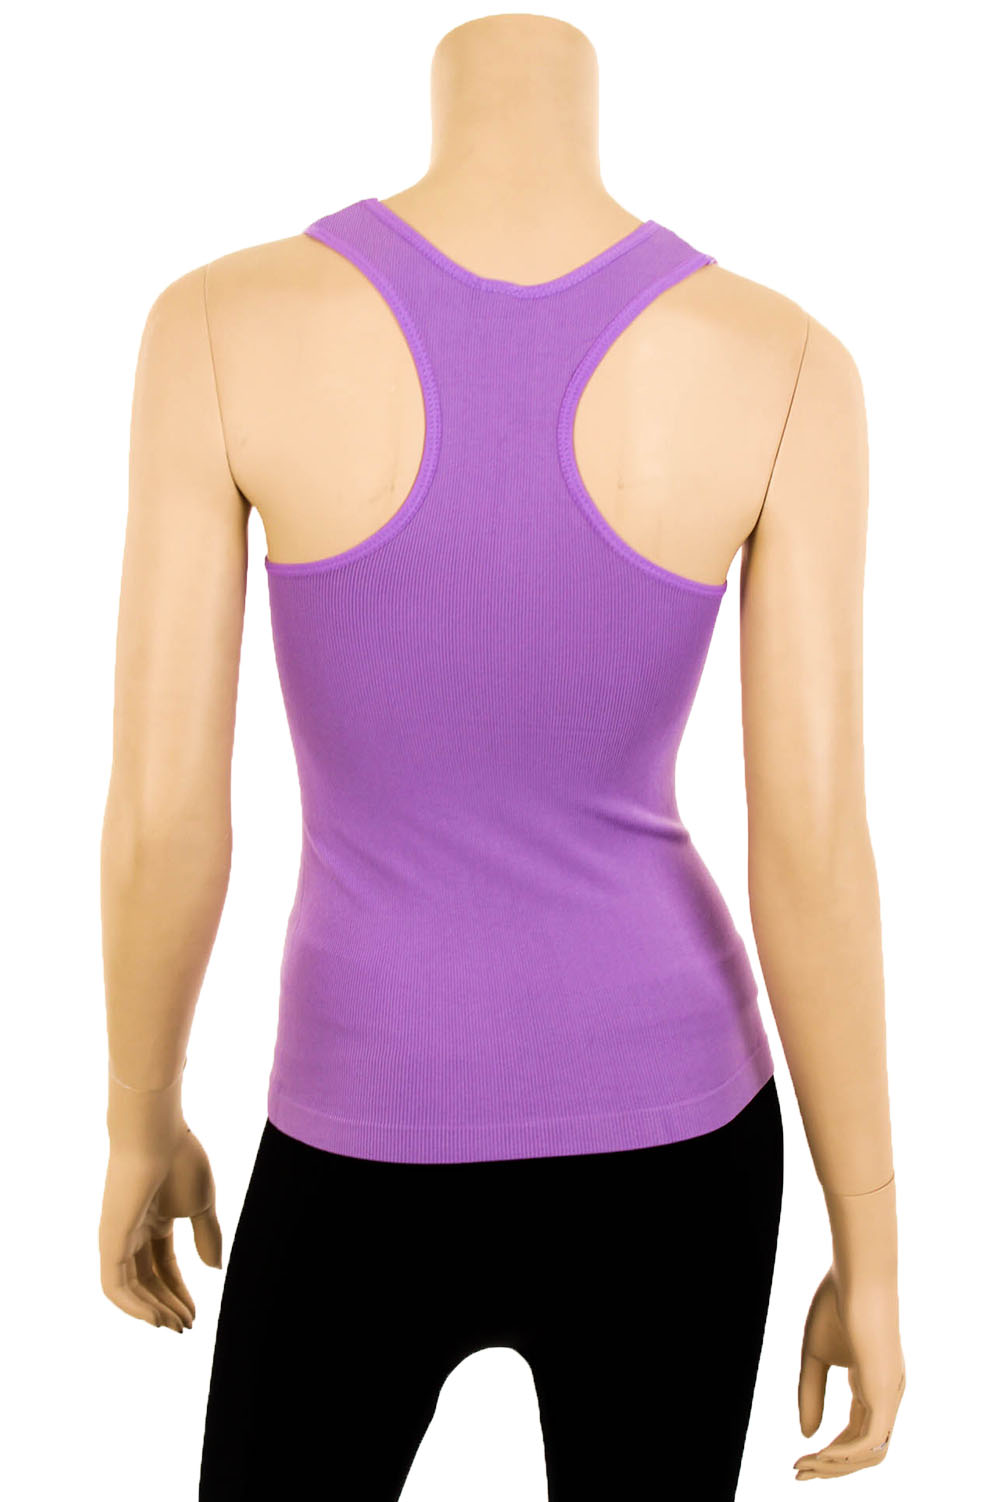 Racerback ribbed tank tops for women printed